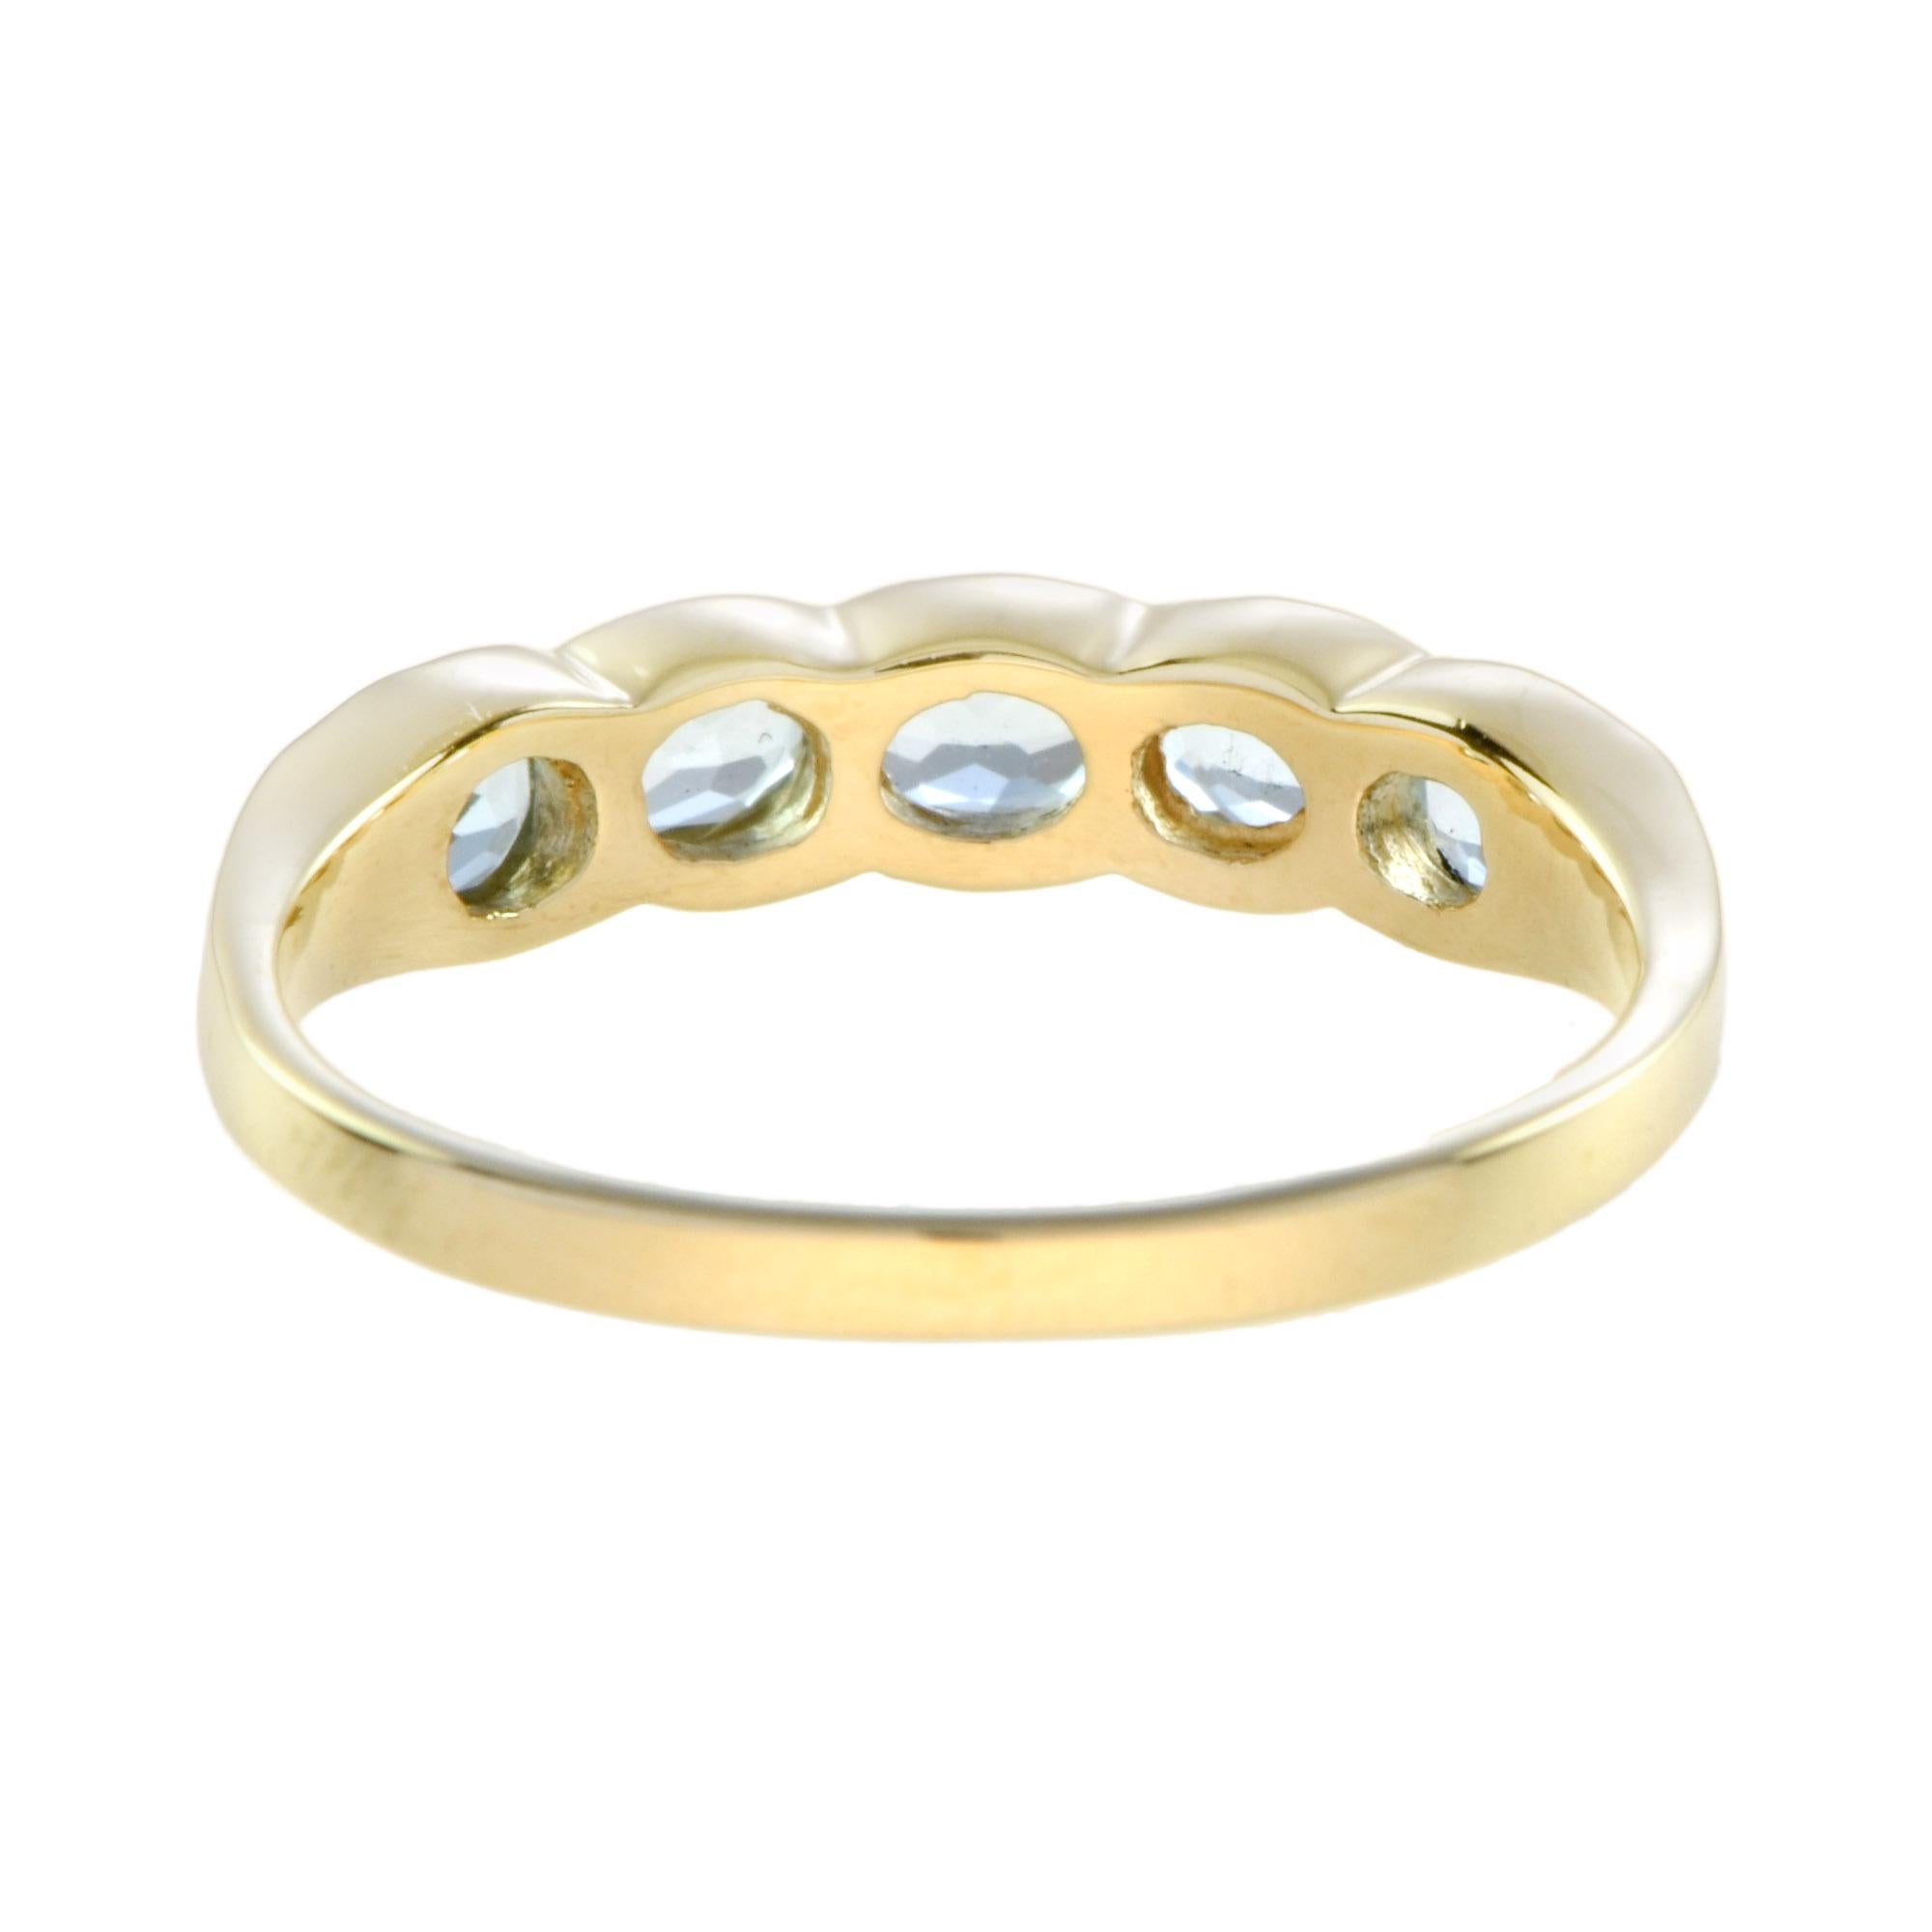 For Sale:  Vintage Style Aquamarine Five Stone Ring in 14K Yellow Gold 4